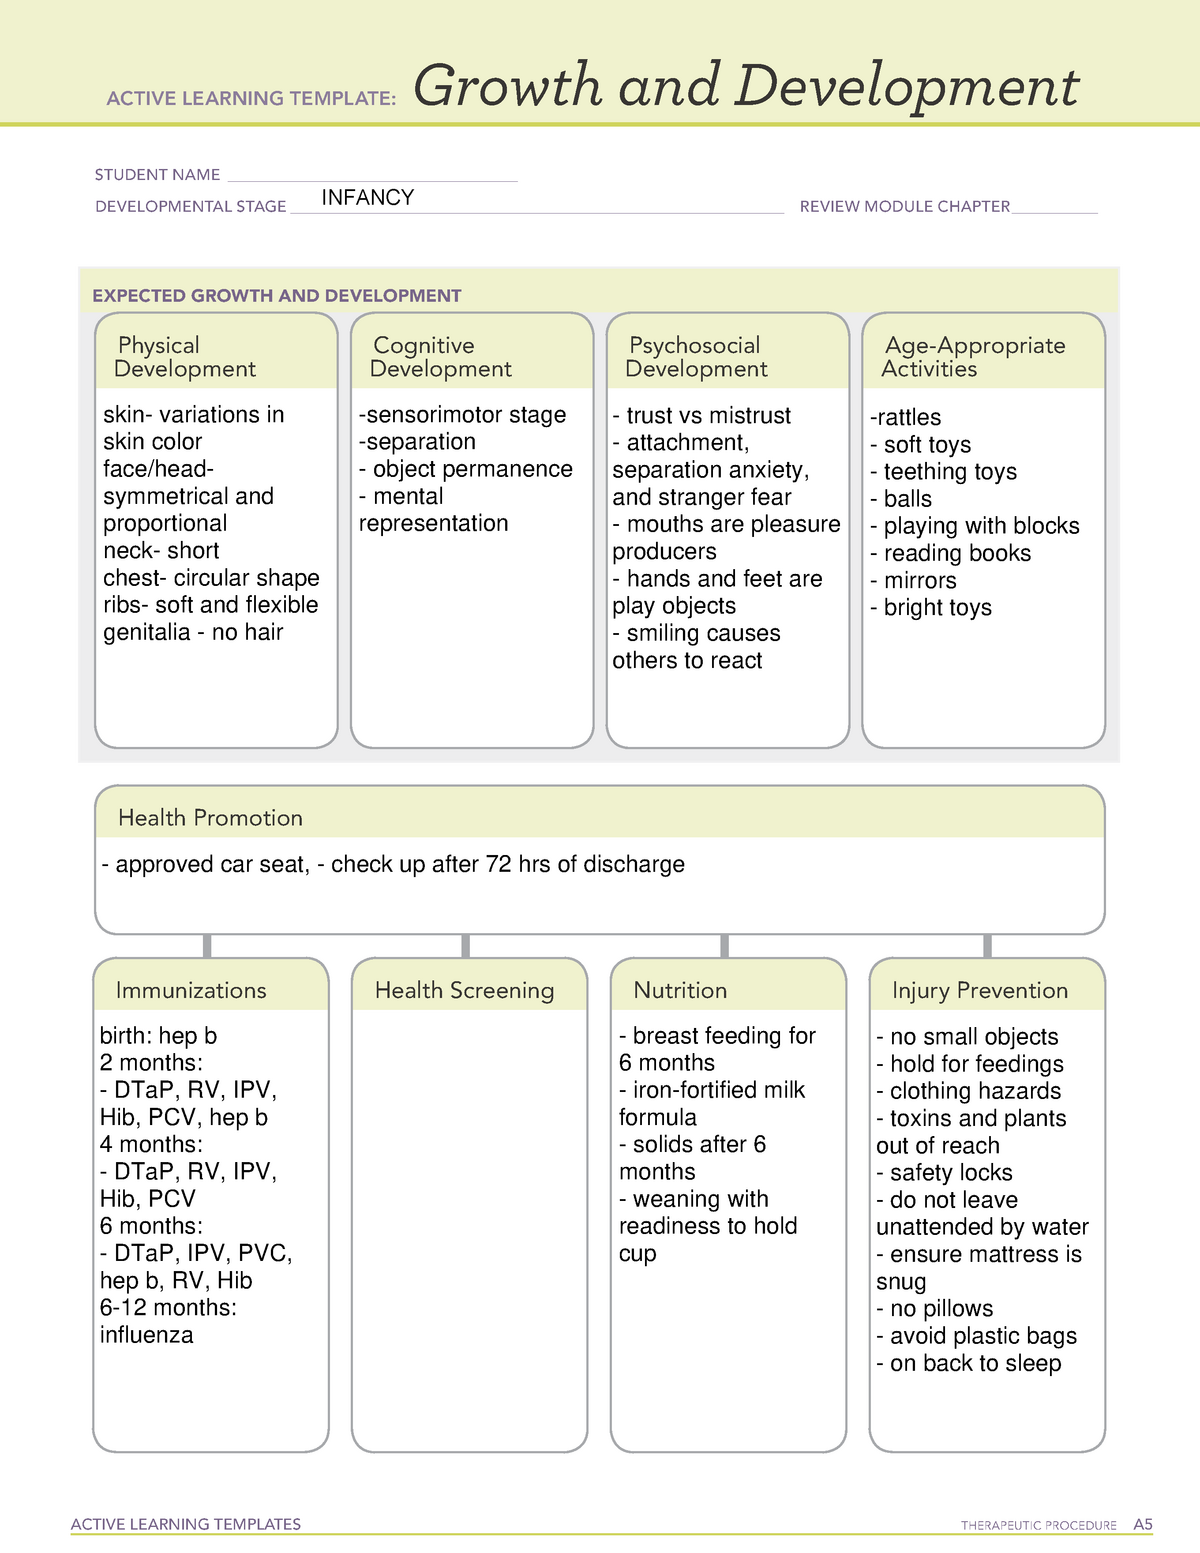 Infancy growth and development ATI Template ACTIVE LEARNING TEMPLATES